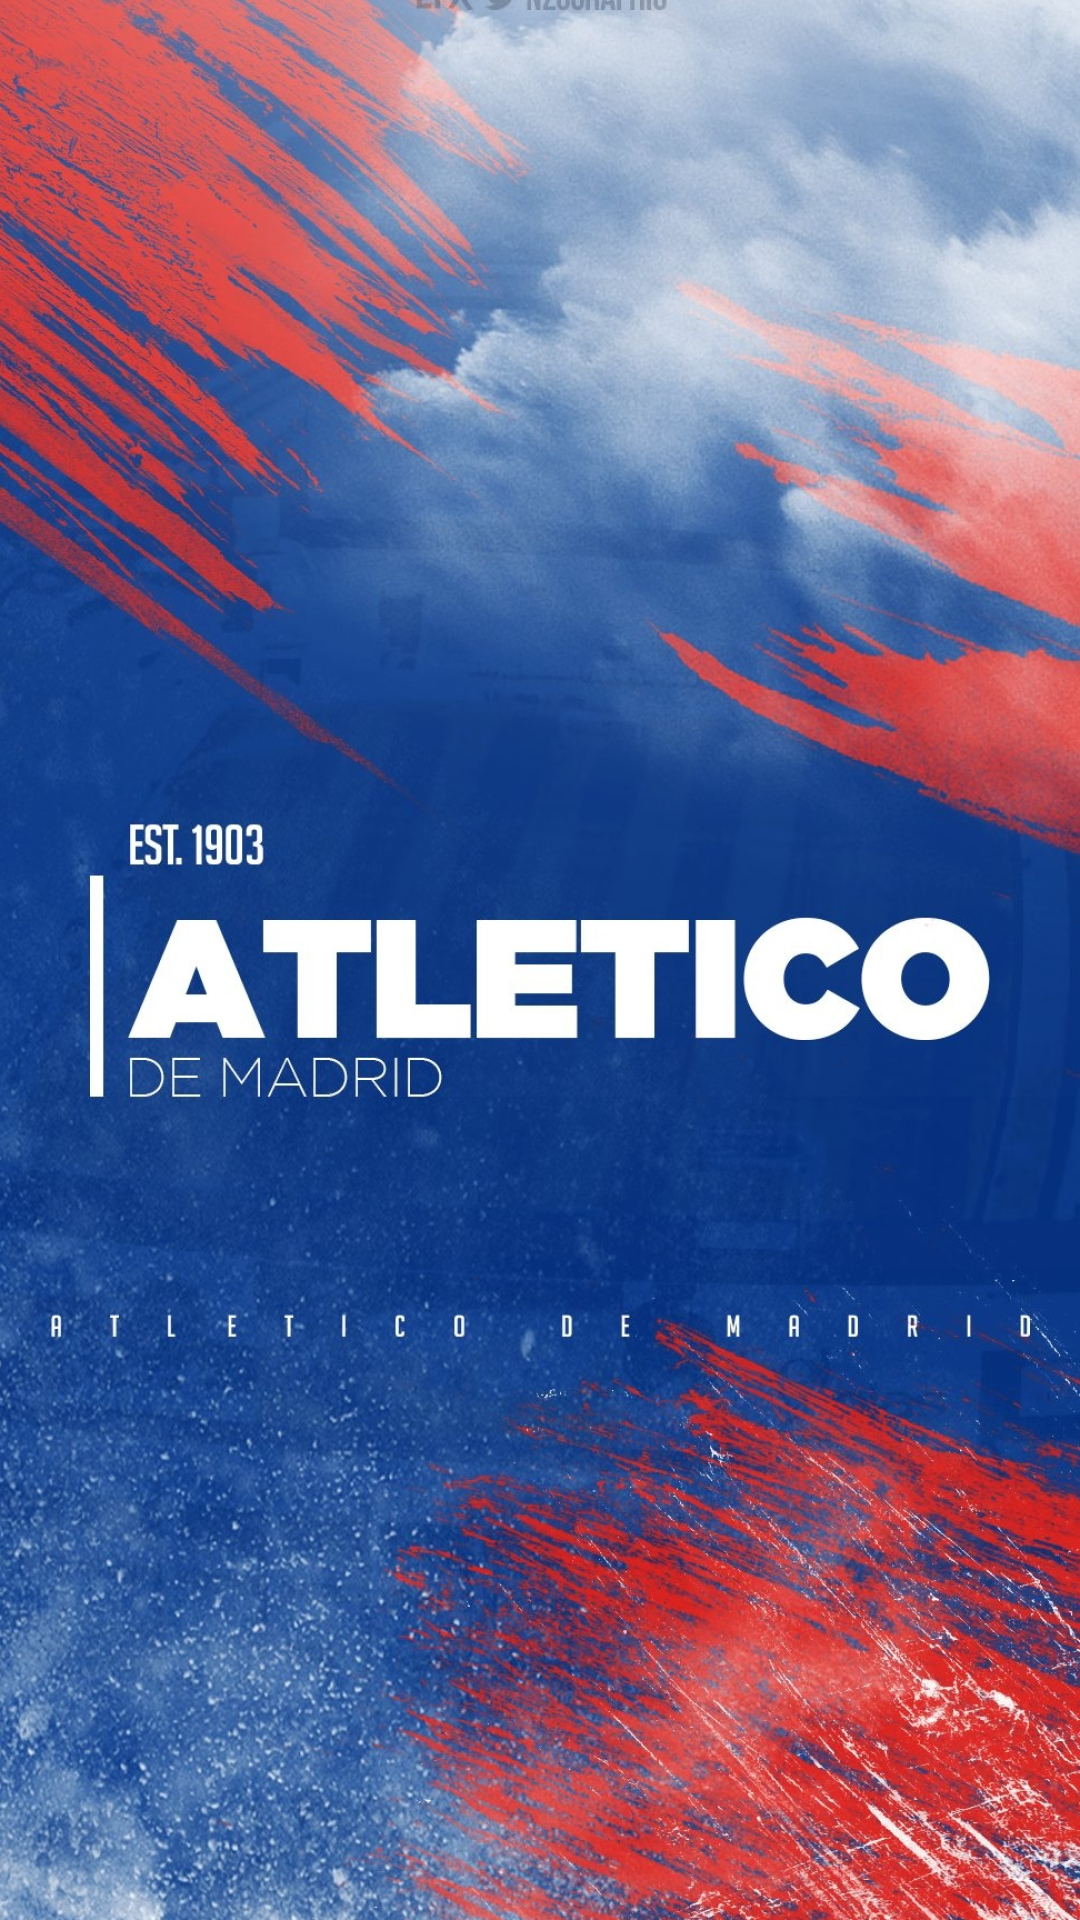 Atletico Madrid: The club lost the 1986 European Cup Winners' Cup final to Dynamo Kyiv. 1080x1920 Full HD Background.